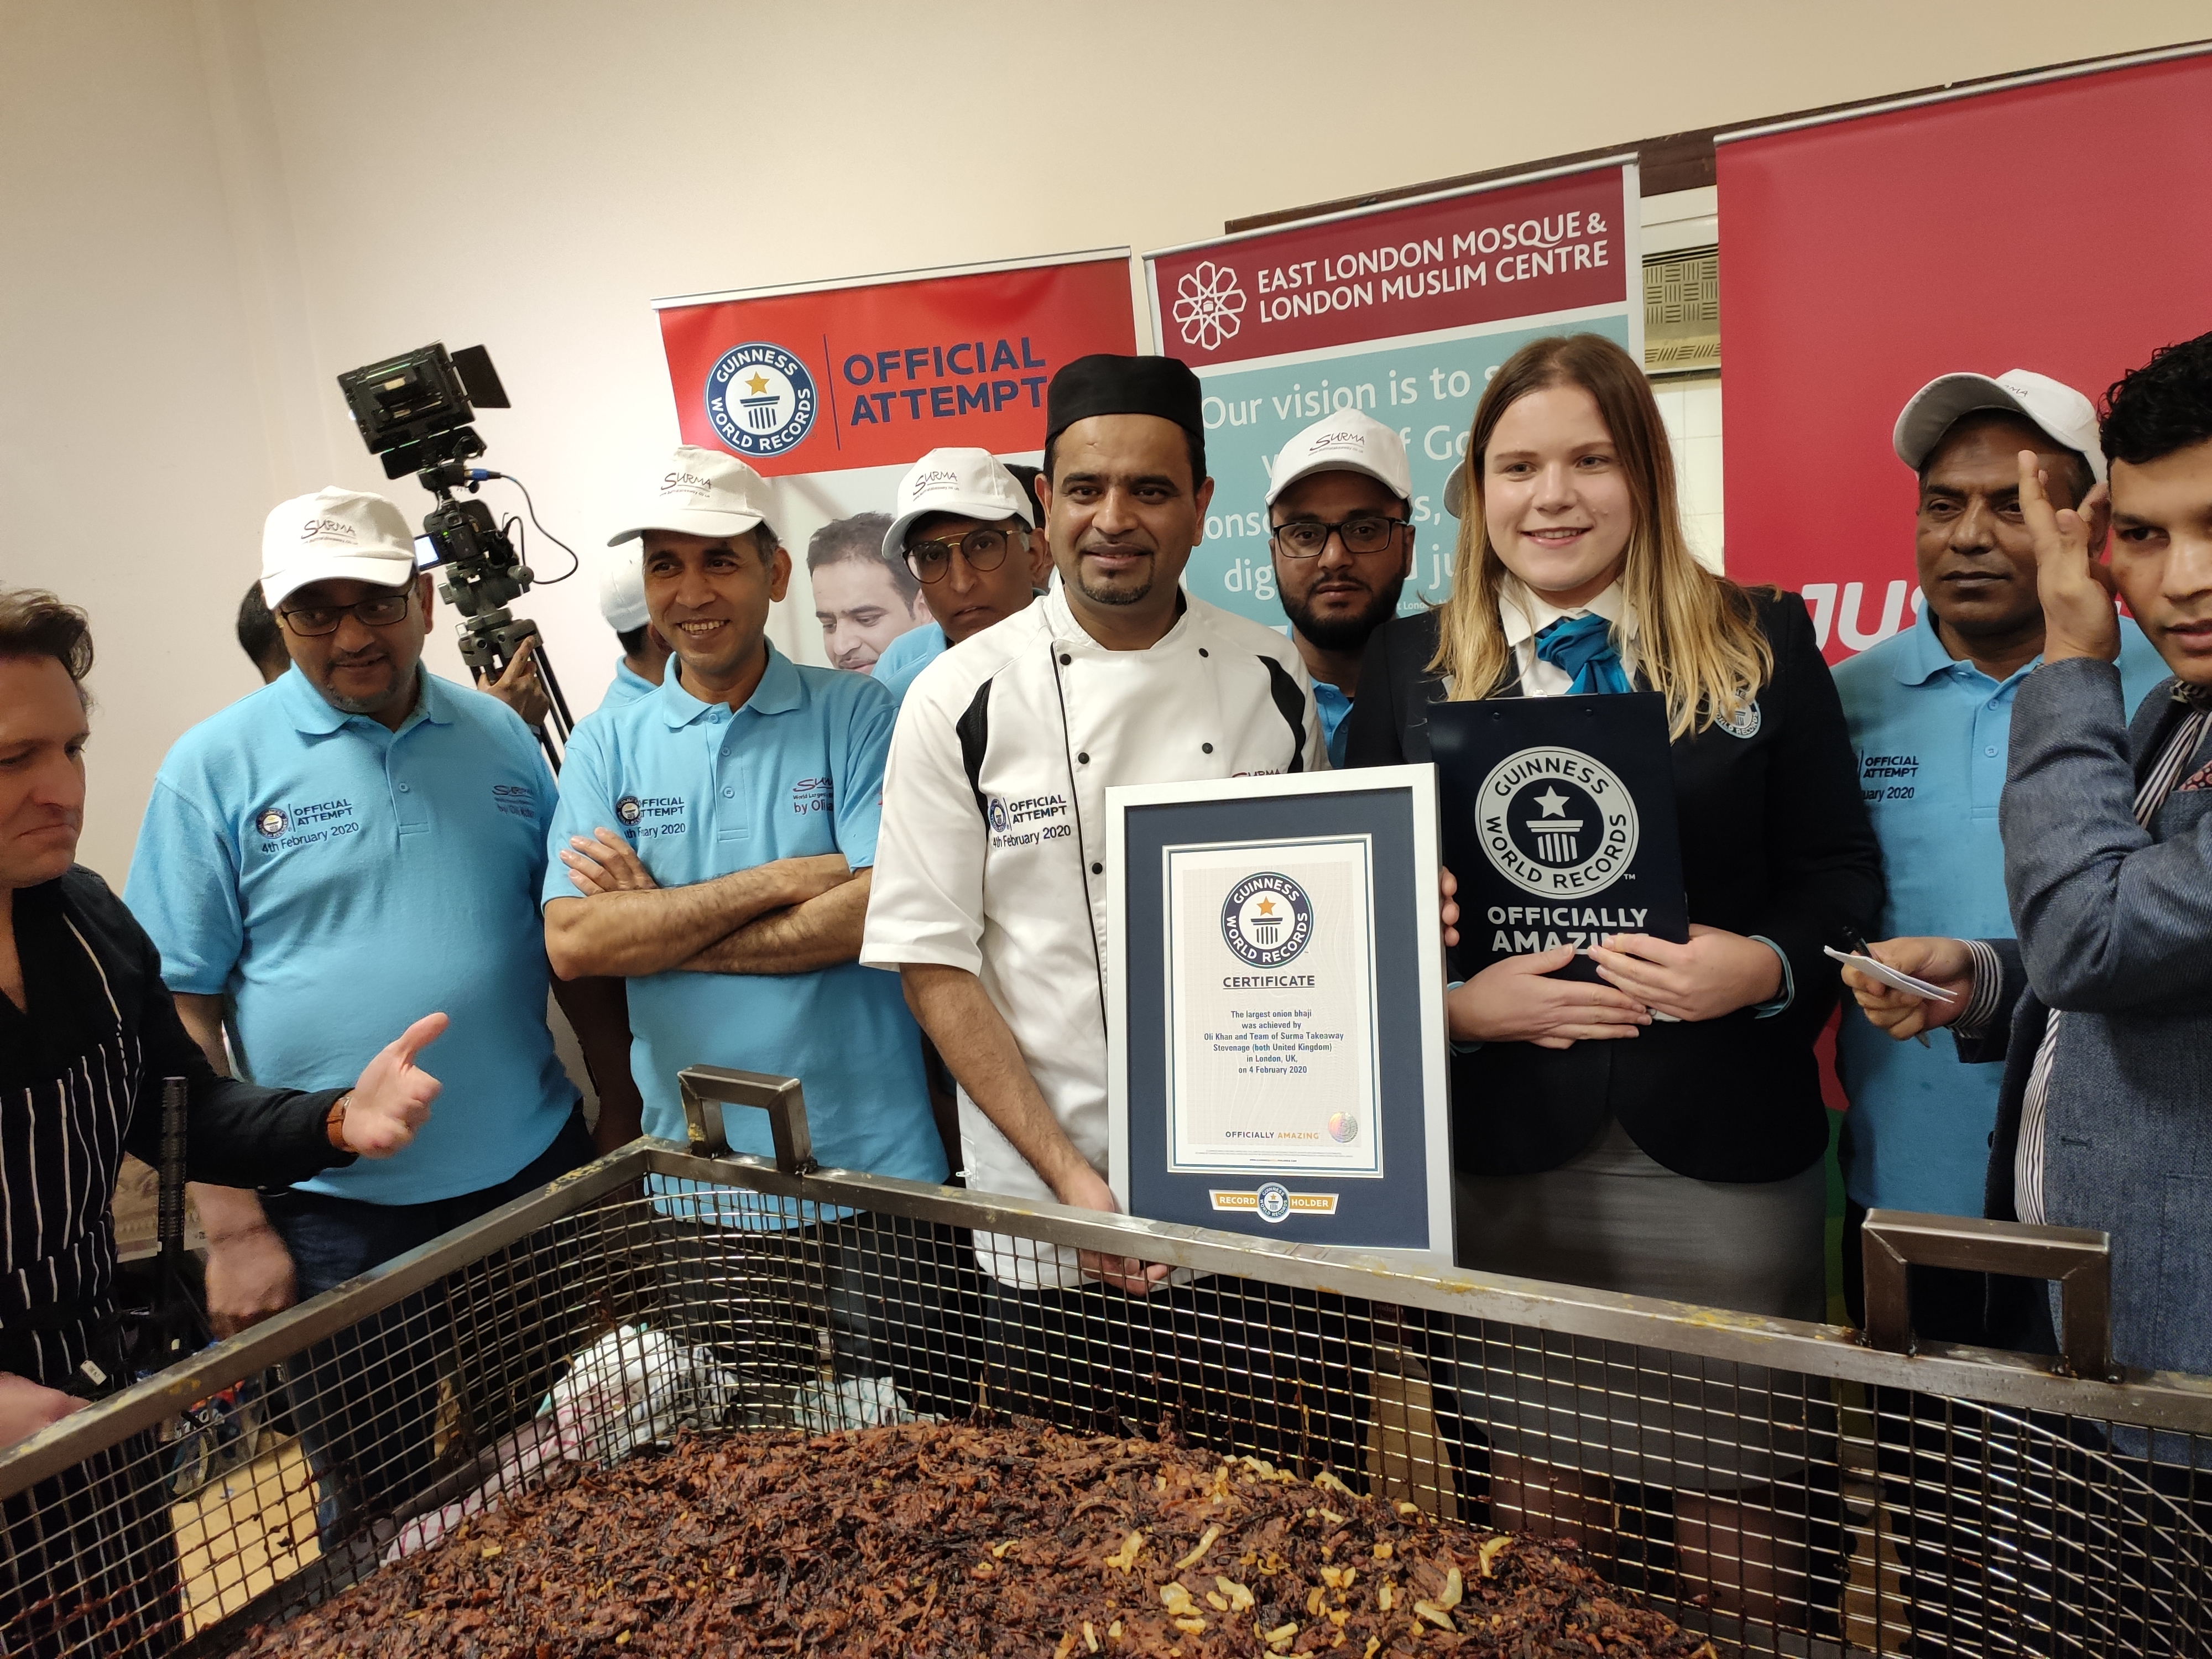 The record for the largest onion bhaji is broken at the East London Mosque and London Muslim Centre